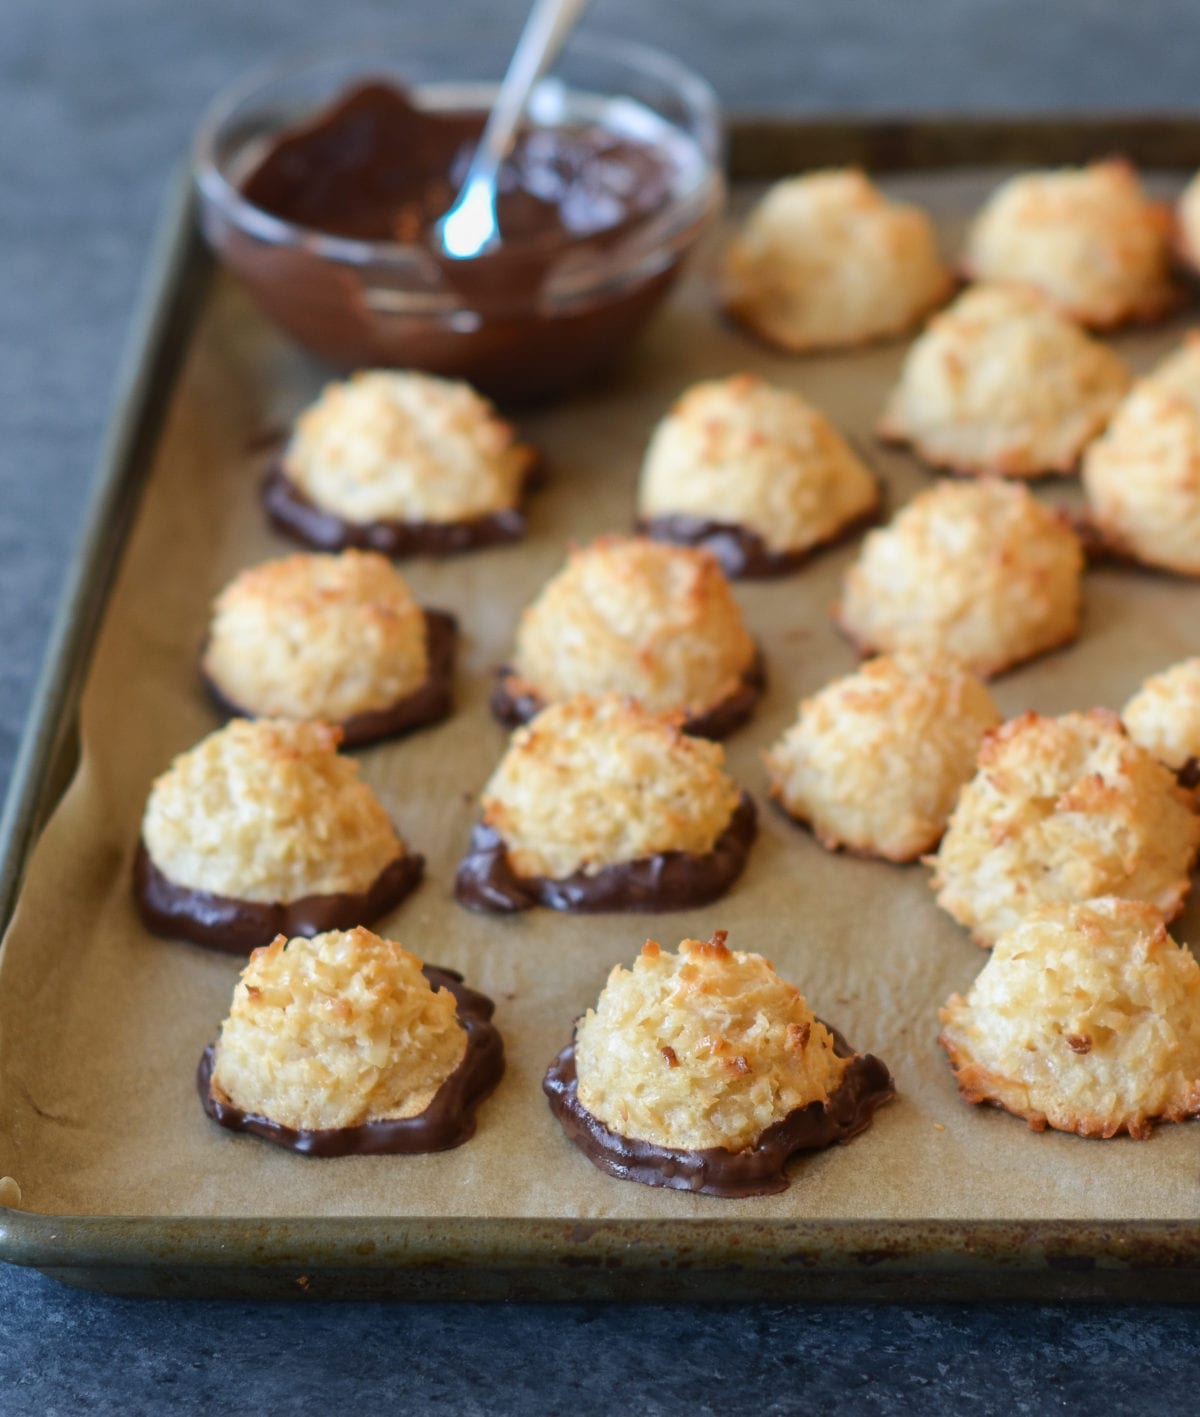 Coconut Macaroons With Maraschino Cherries Recipe: Step by Step Guide  